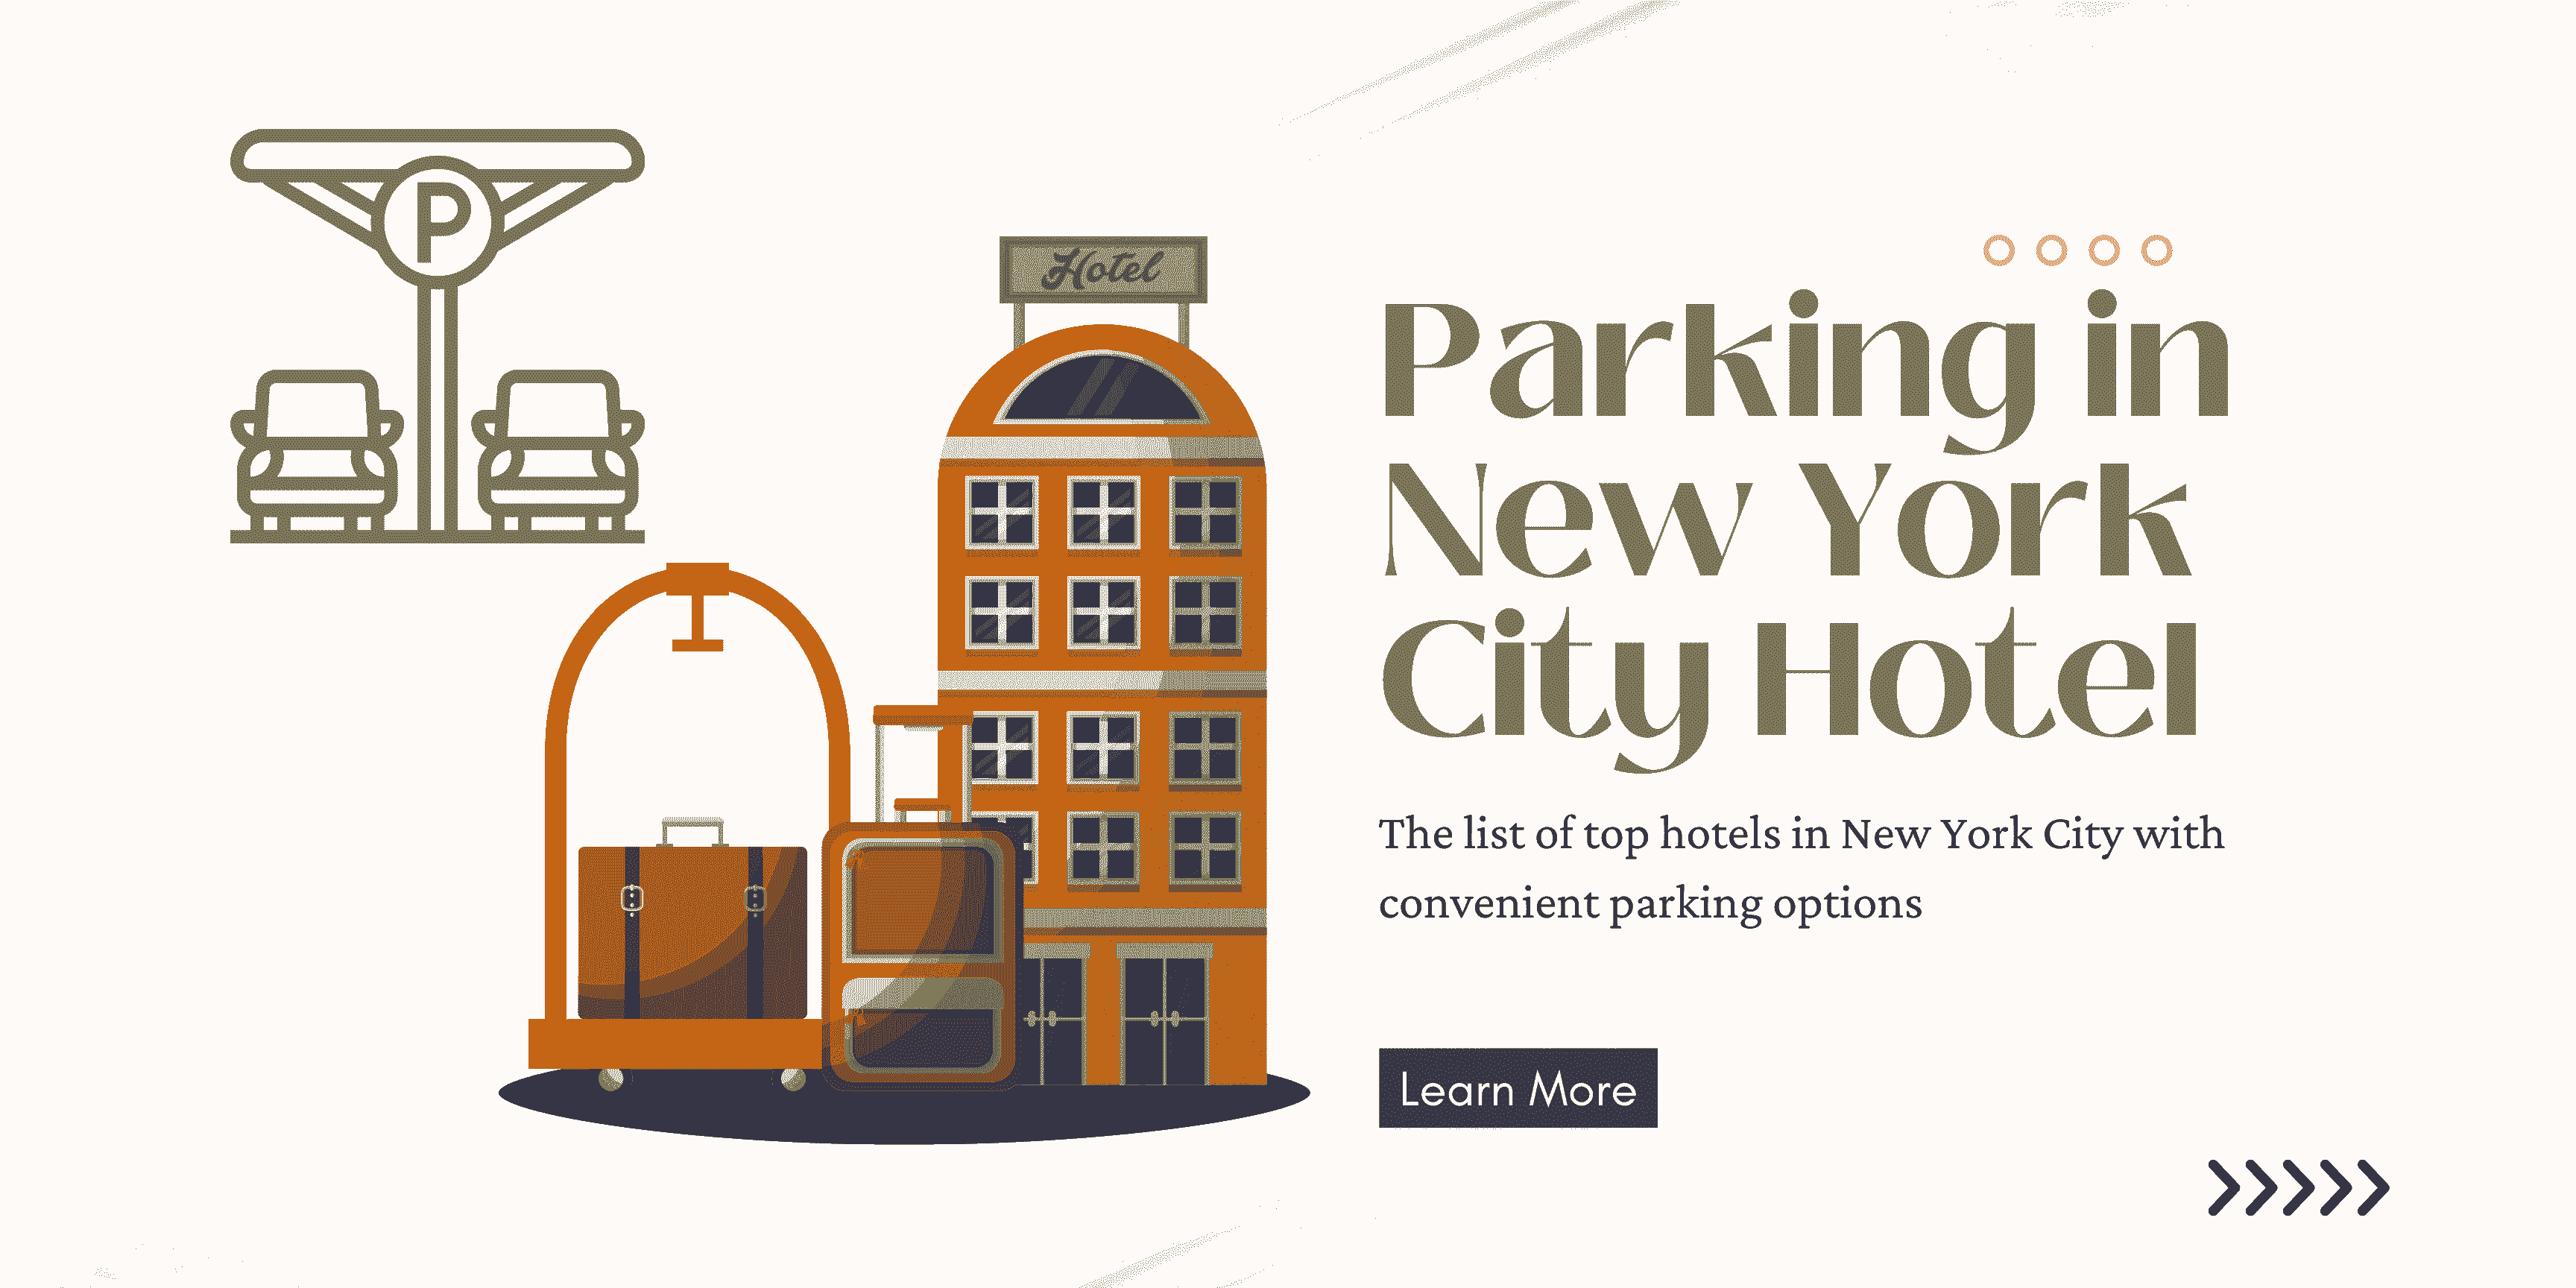 Parking in New York city hotel